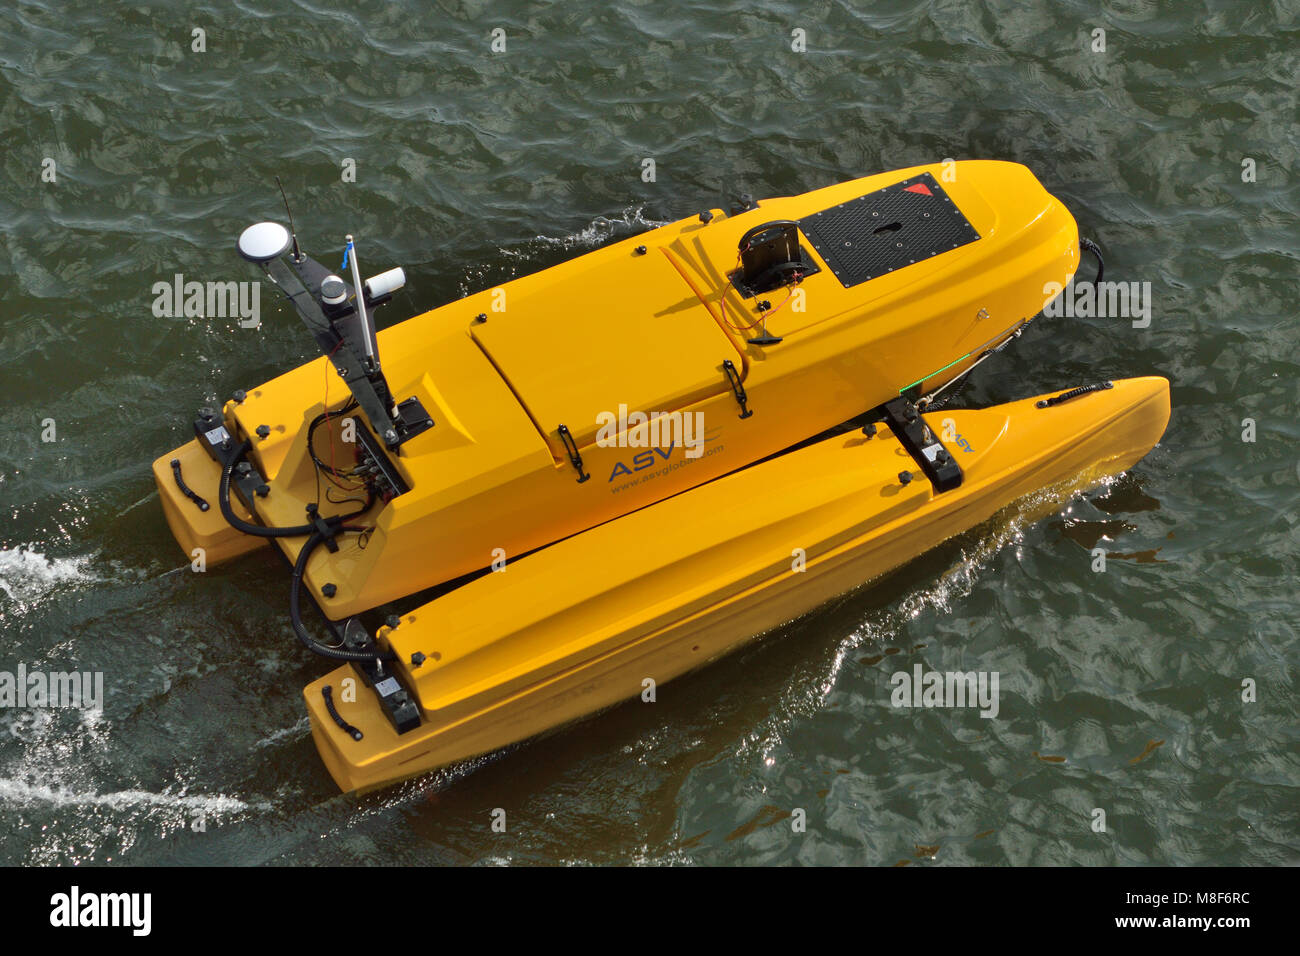 ASV Global C-CAT3 unmanned autonomous surface vessel being demonstrated at the Oceanology International 2018 exhibition in London's Royal Docks Stock Photo